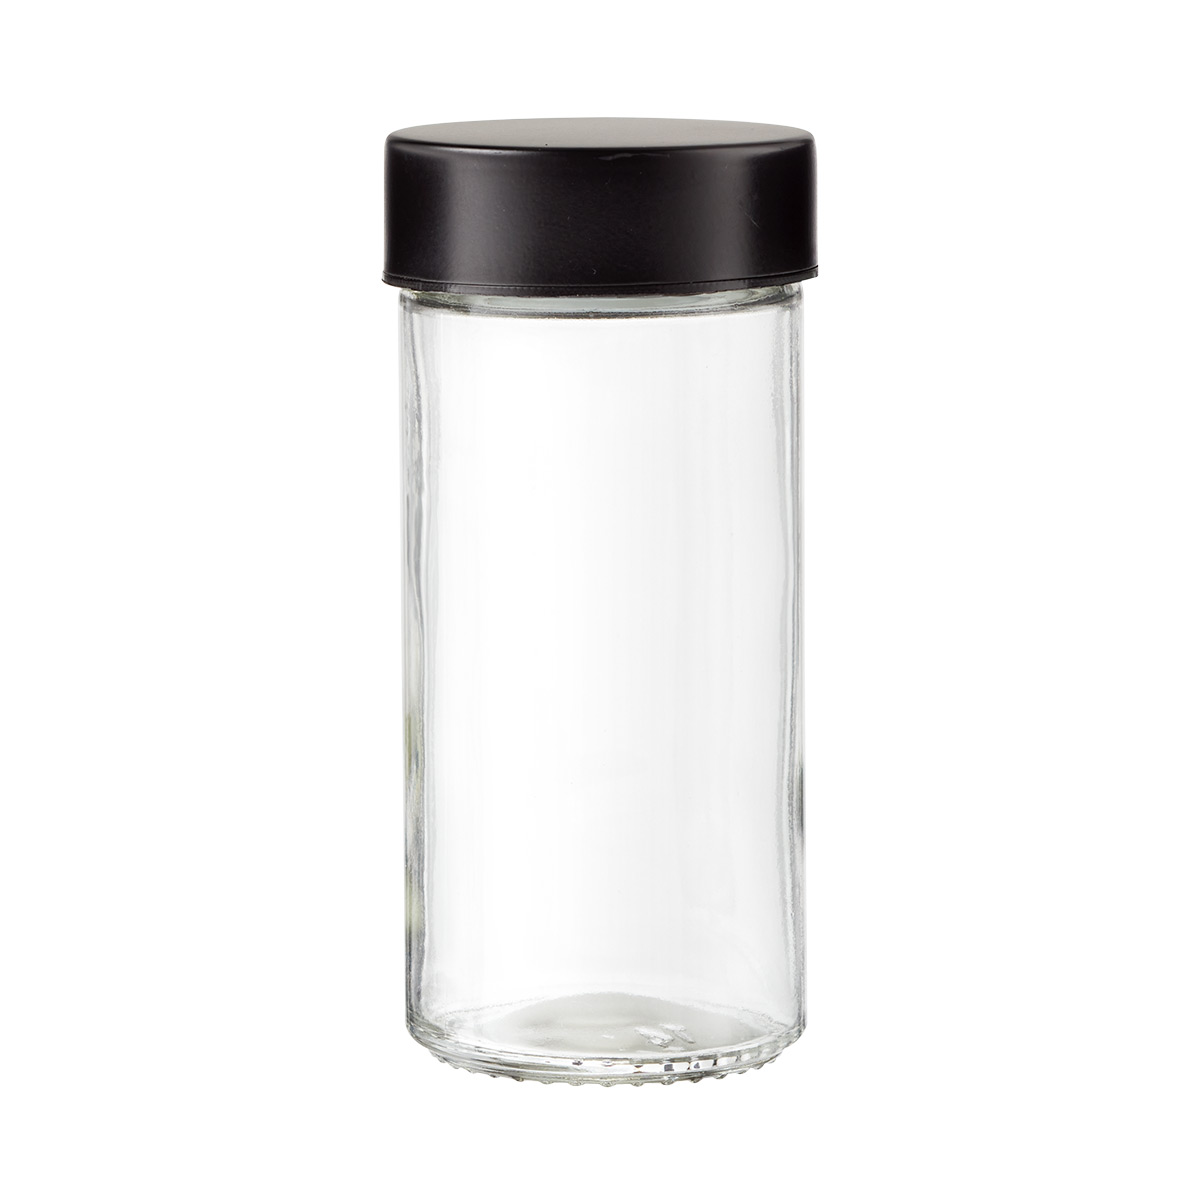 https://www.containerstore.com/catalogimages/479728/10092271-3-ounce-glass-spice-jar-bla.jpg